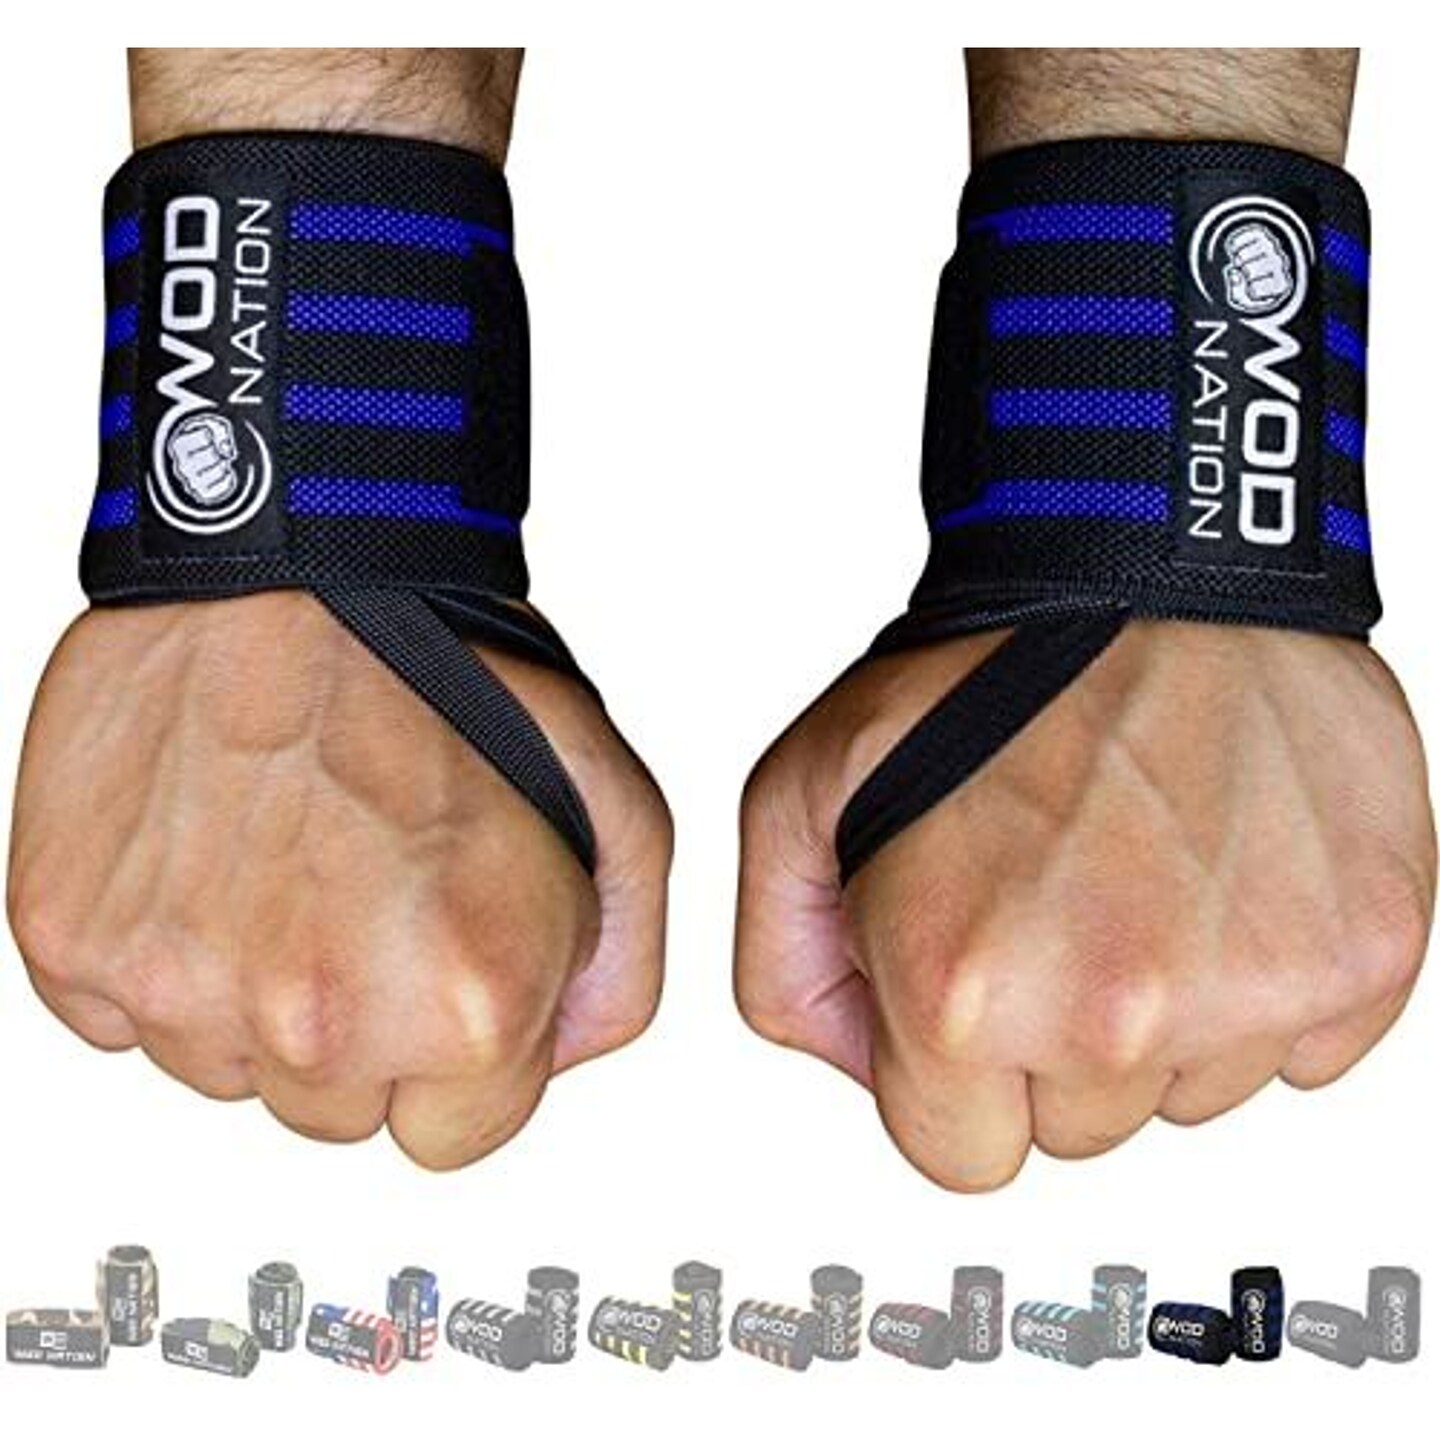 WOD Nation Wrist Wraps &#x26; Straps for Gym &#x26; Weightlifting (18 inch) - Essential Weight Lifting Wrist Wraps &#x26; Gym Wrist Straps Support for Optimal Powerlifting Performance For Women &#x26; Men - Black/DK Blue